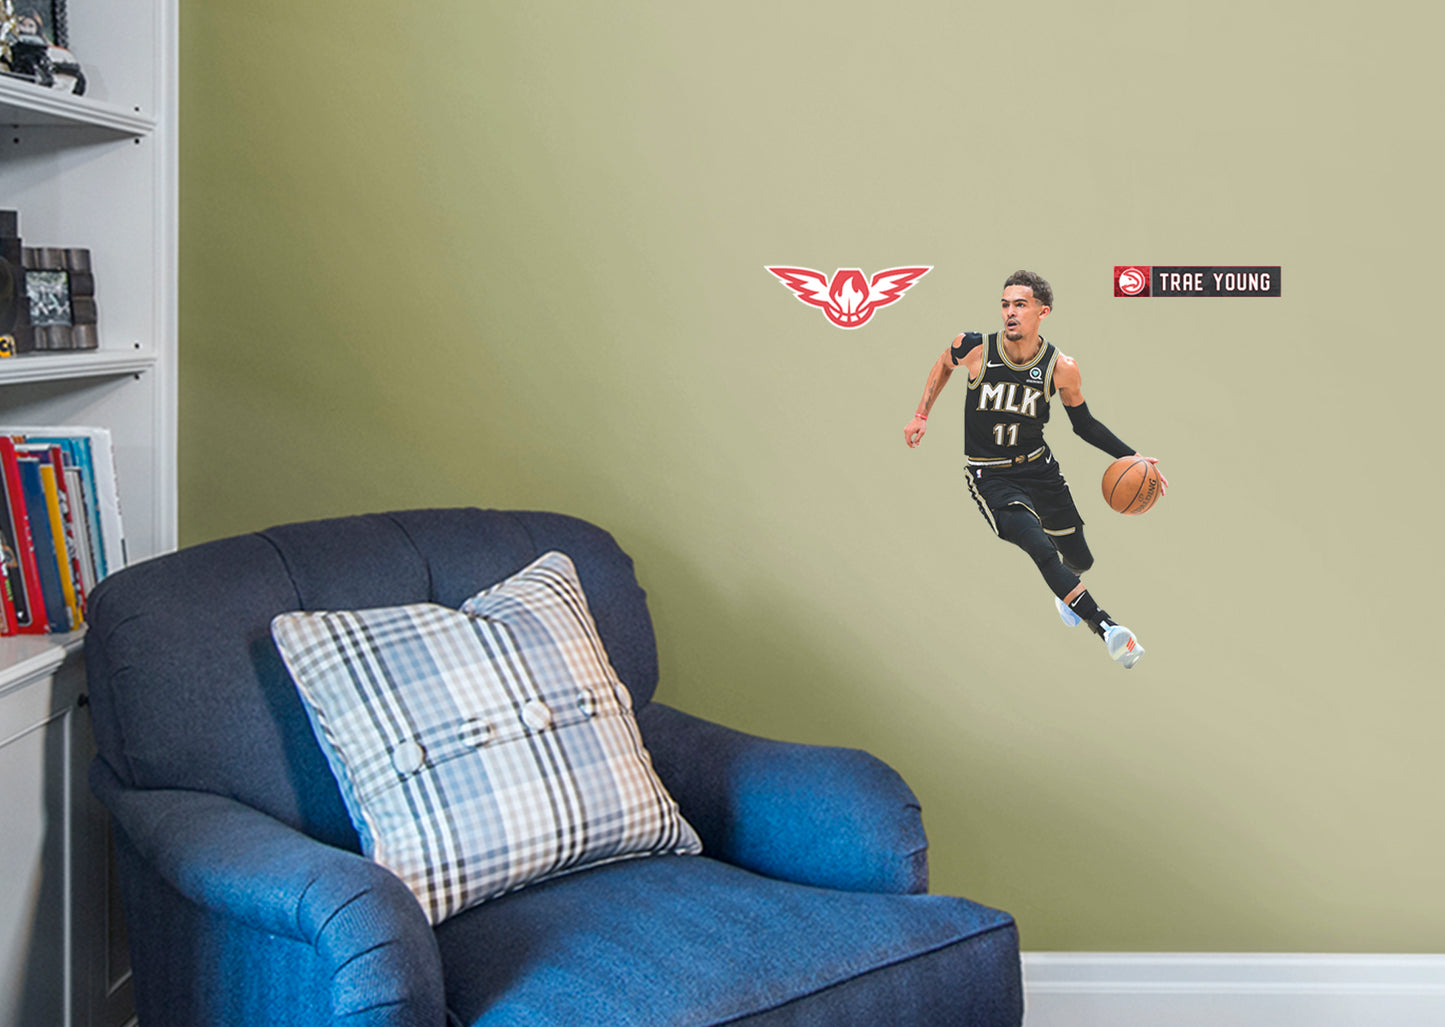 Atlanta Hawks: Trae Young  MLK Jersey        - Officially Licensed NBA Removable Wall   Adhesive Decal